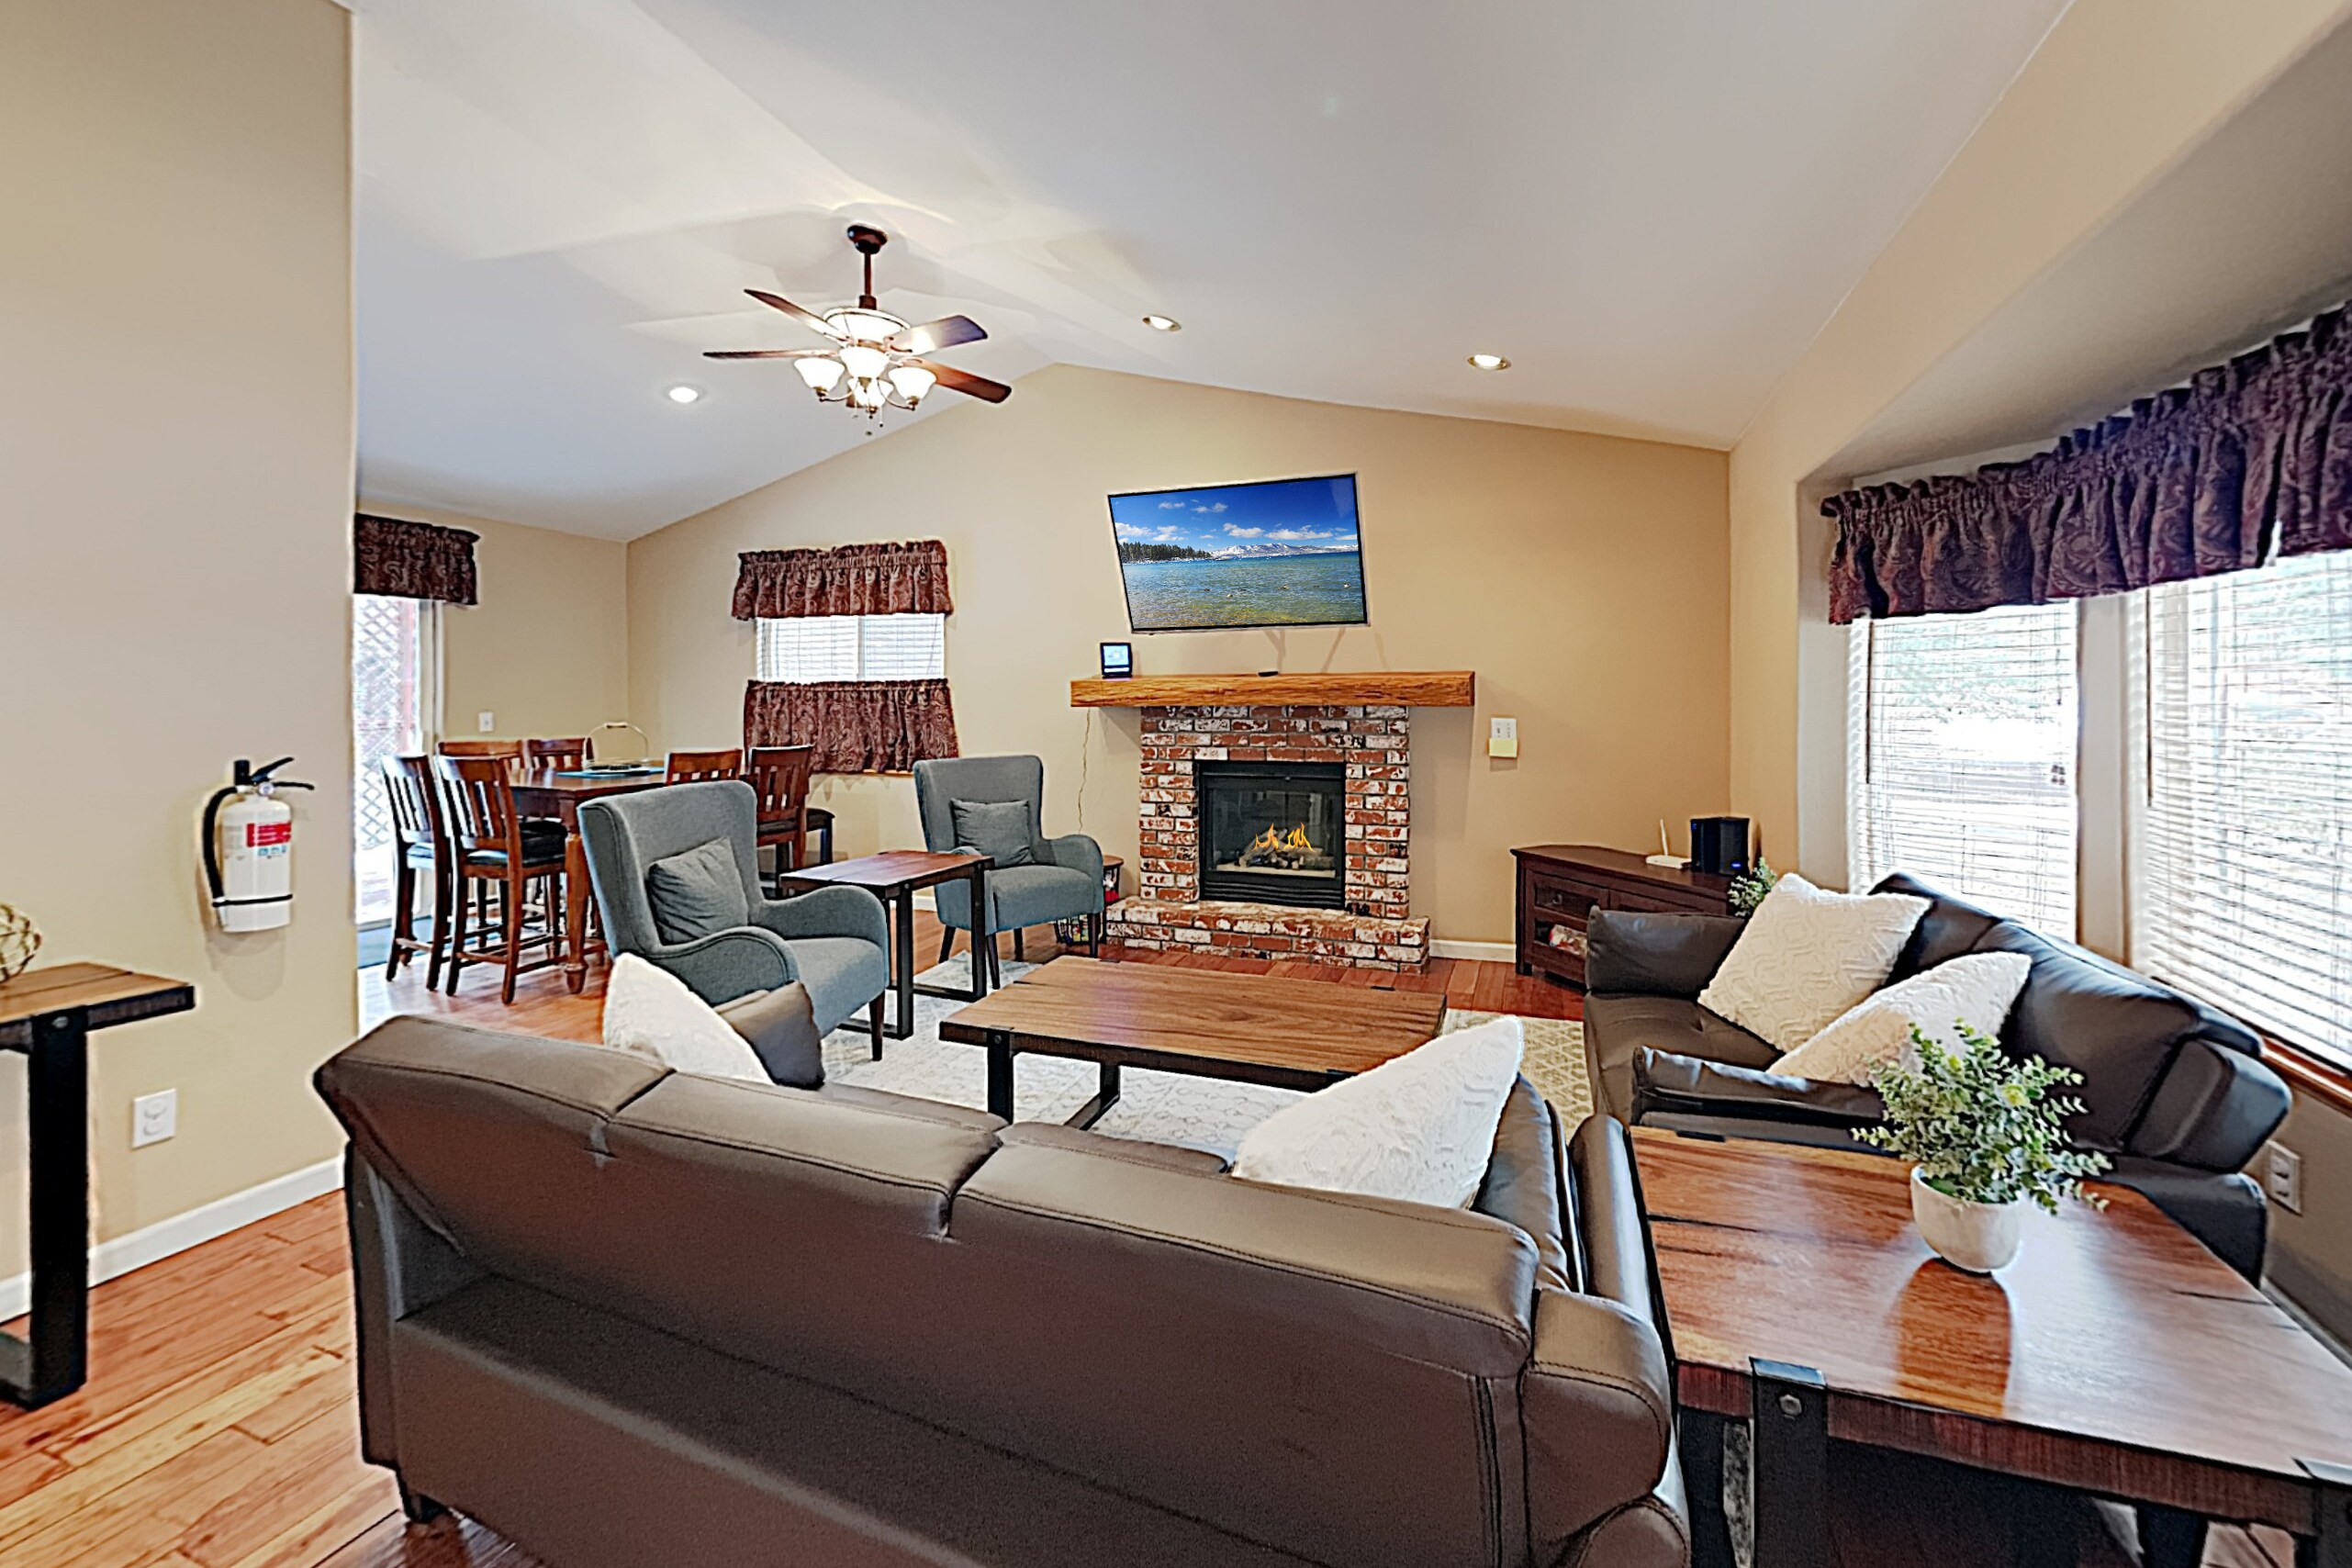 A brick-lined gas fireplace sits center stage in the light-filled living room.